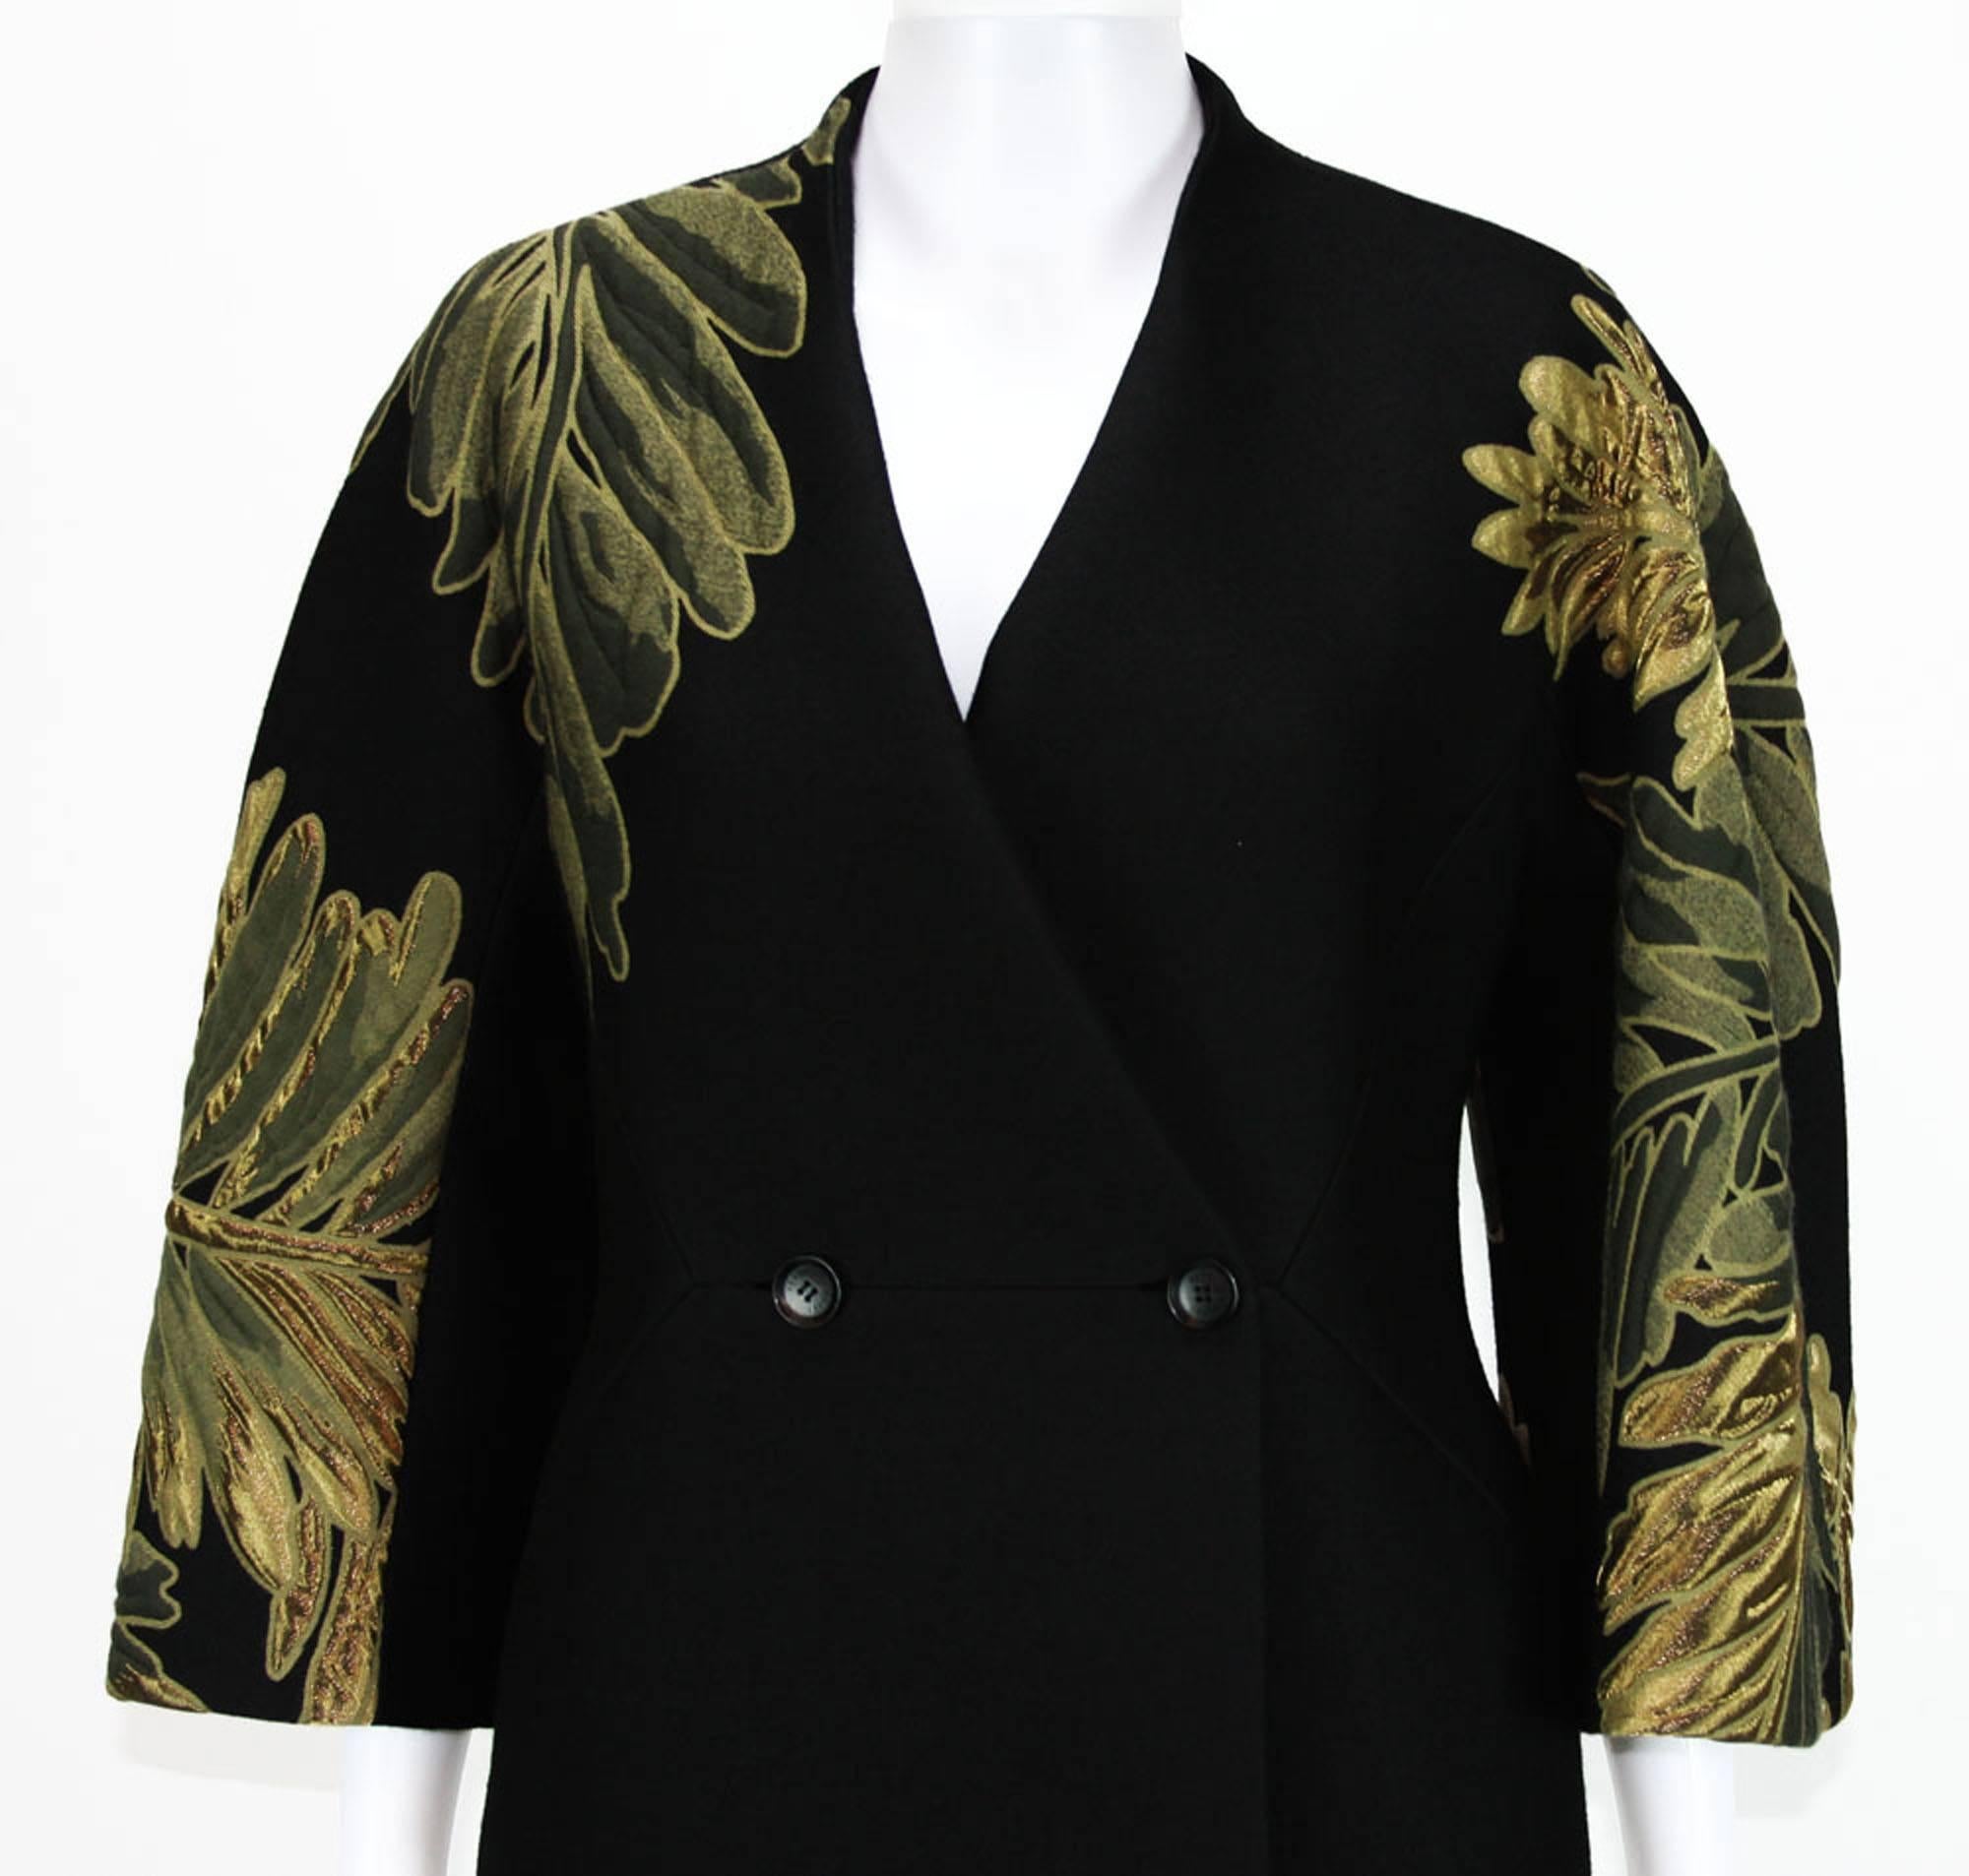 New GUCCI Runway Jacquard Wool Fern Motif Black Coat It. 40 - US 4/6 In New Condition For Sale In Montgomery, TX